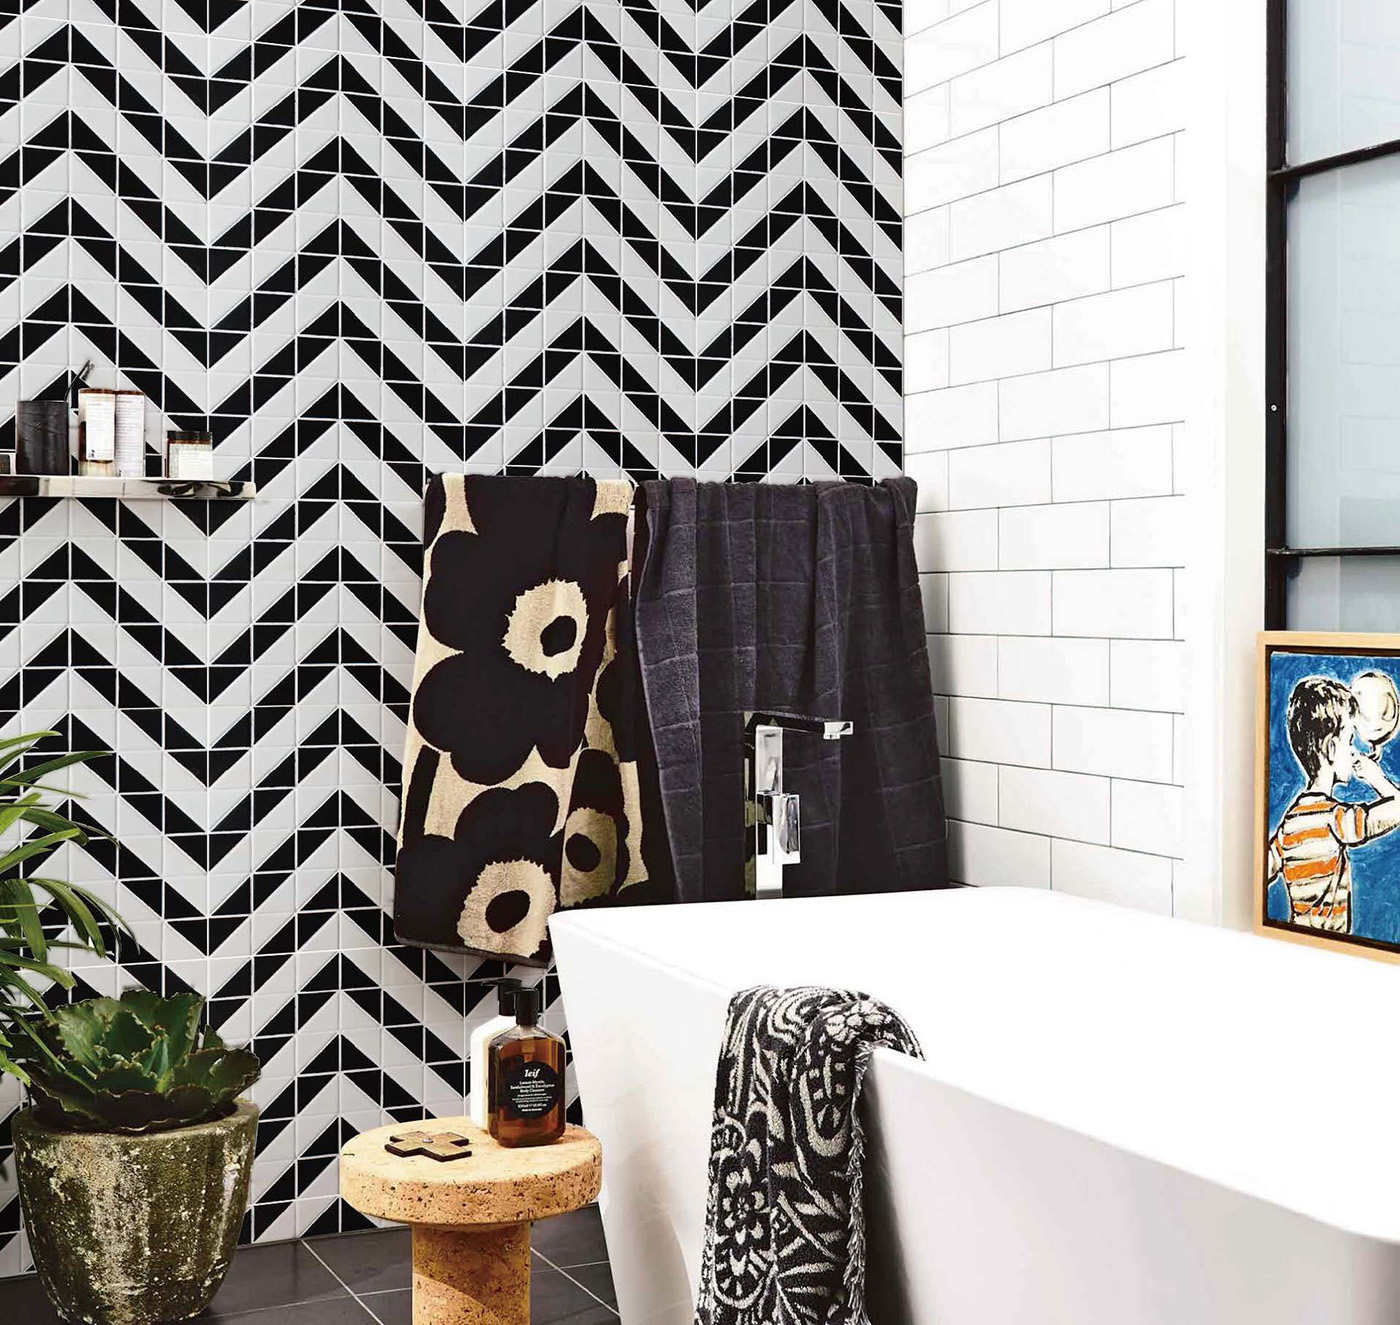 Bathroom with bold pattern, triangle mosaic tiles, artistic tile design